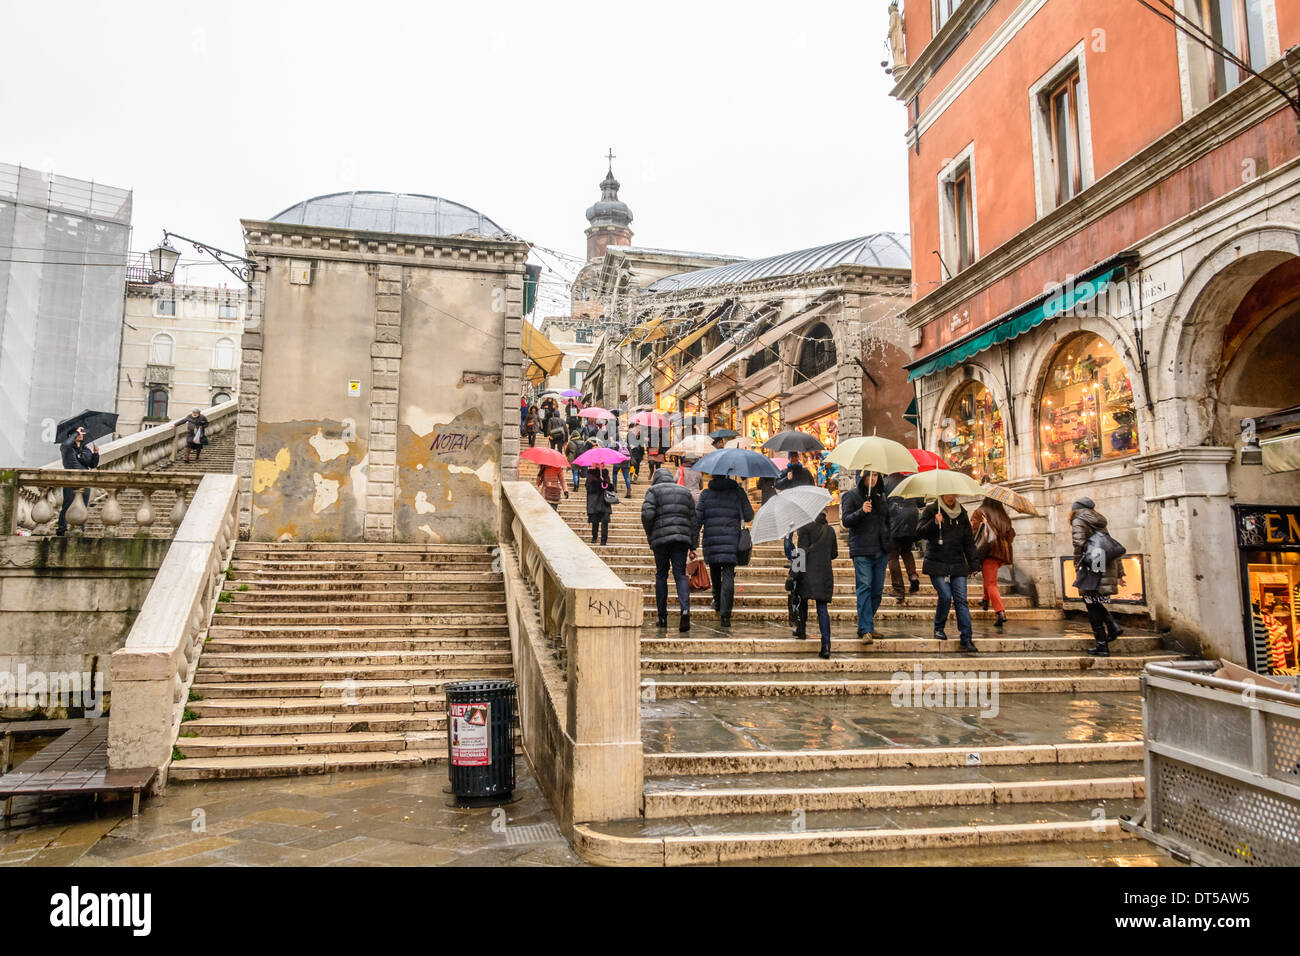 Venice, Italy. People with umbrellas and wet weather clothing crossing the Rialto Bridge at a rainy day, overcast sky. Stock Photo